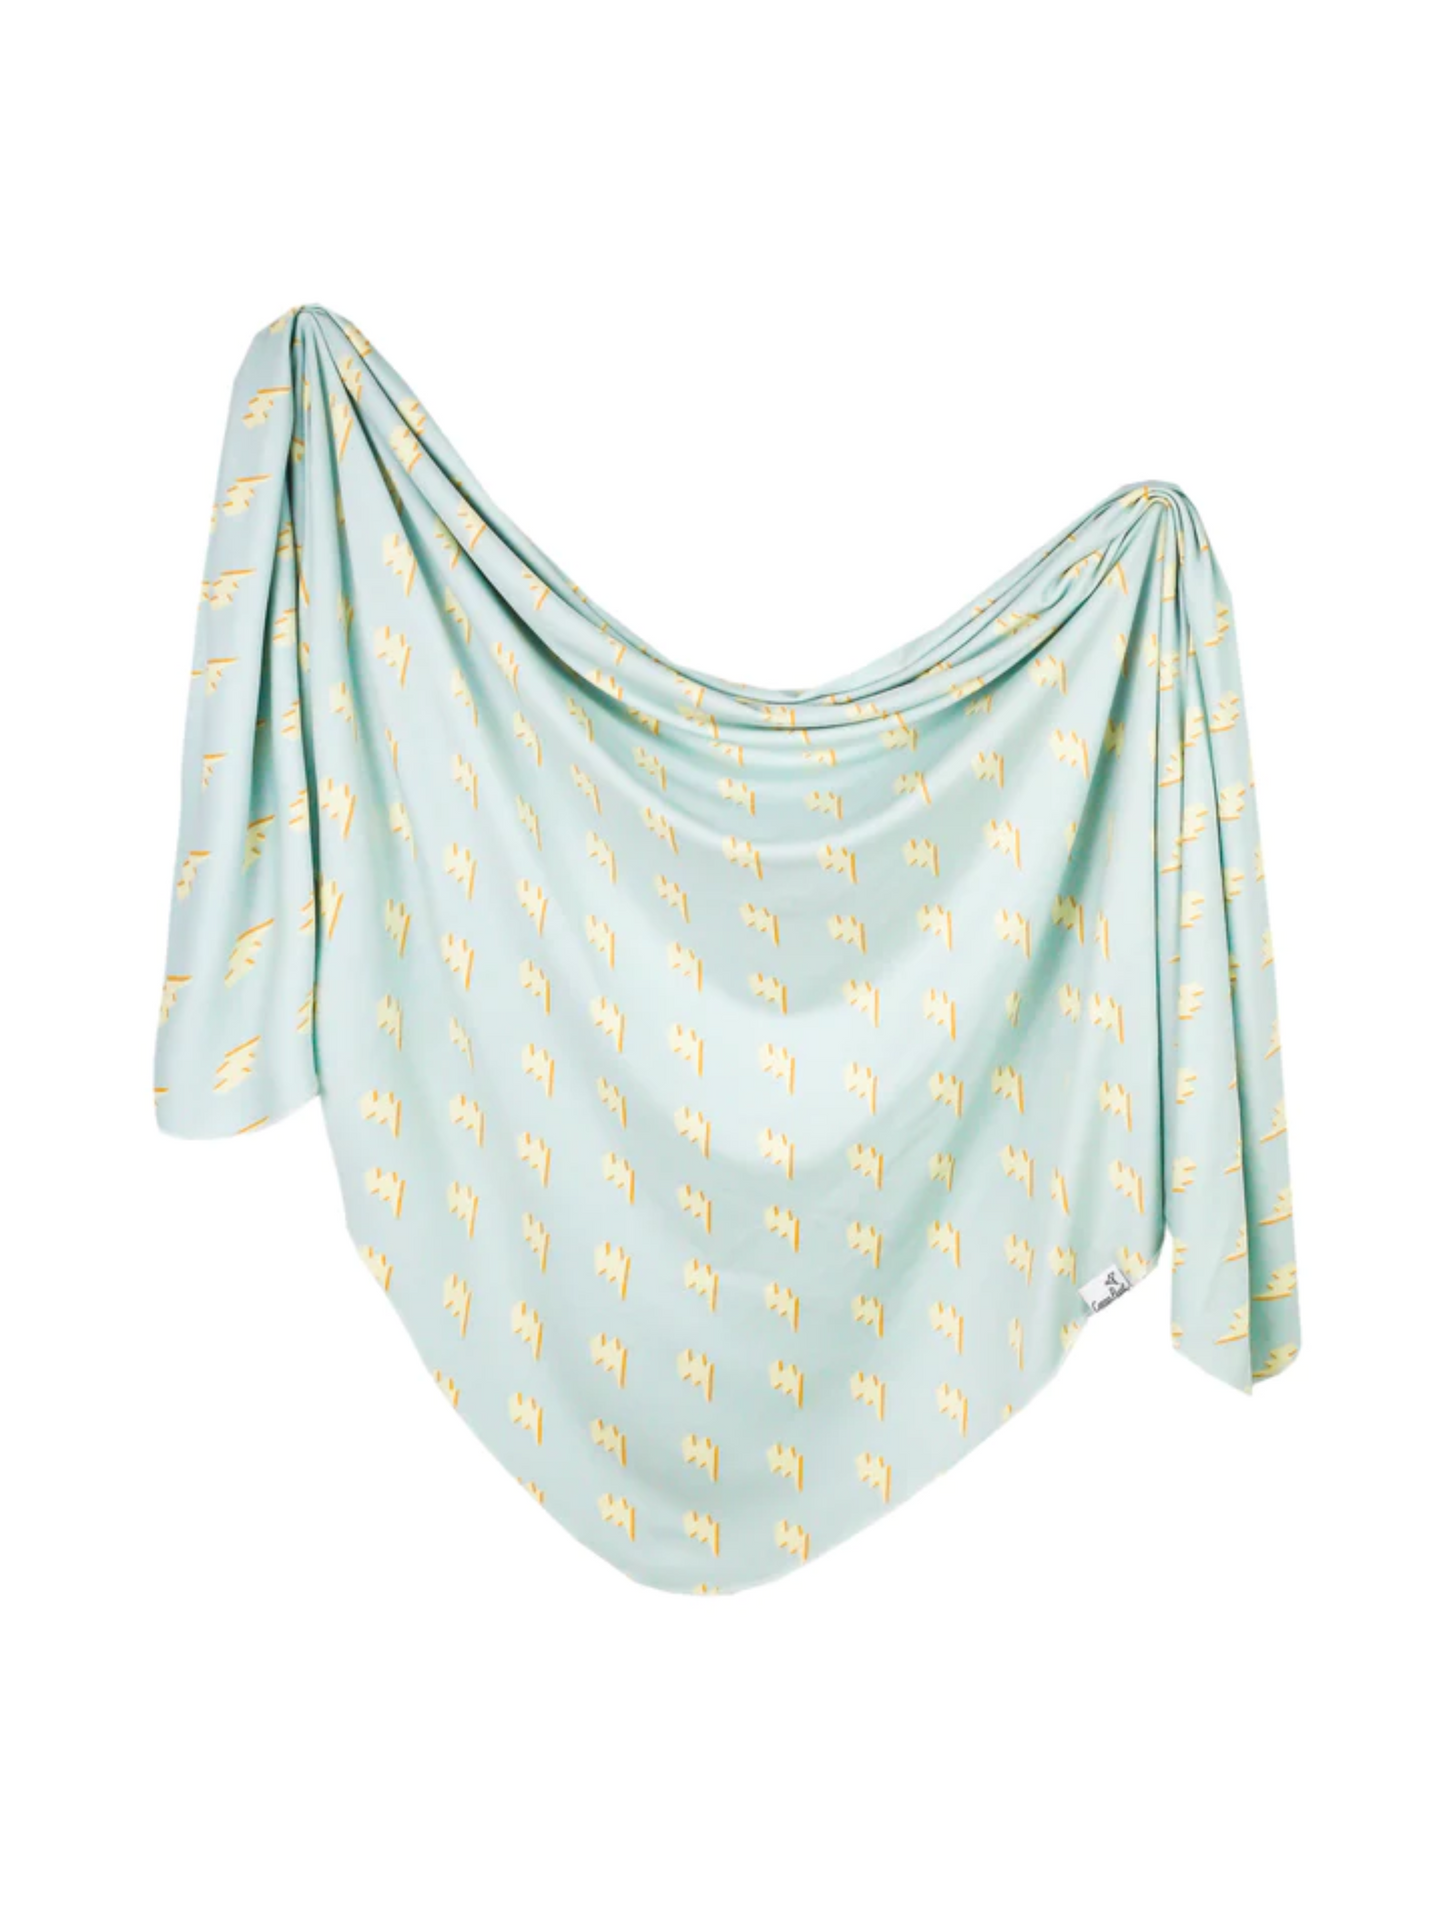 COPPER PEARL SWADDLE BLANKET IN BOLT - THE LITTLE EAGLE BOUTIQUE